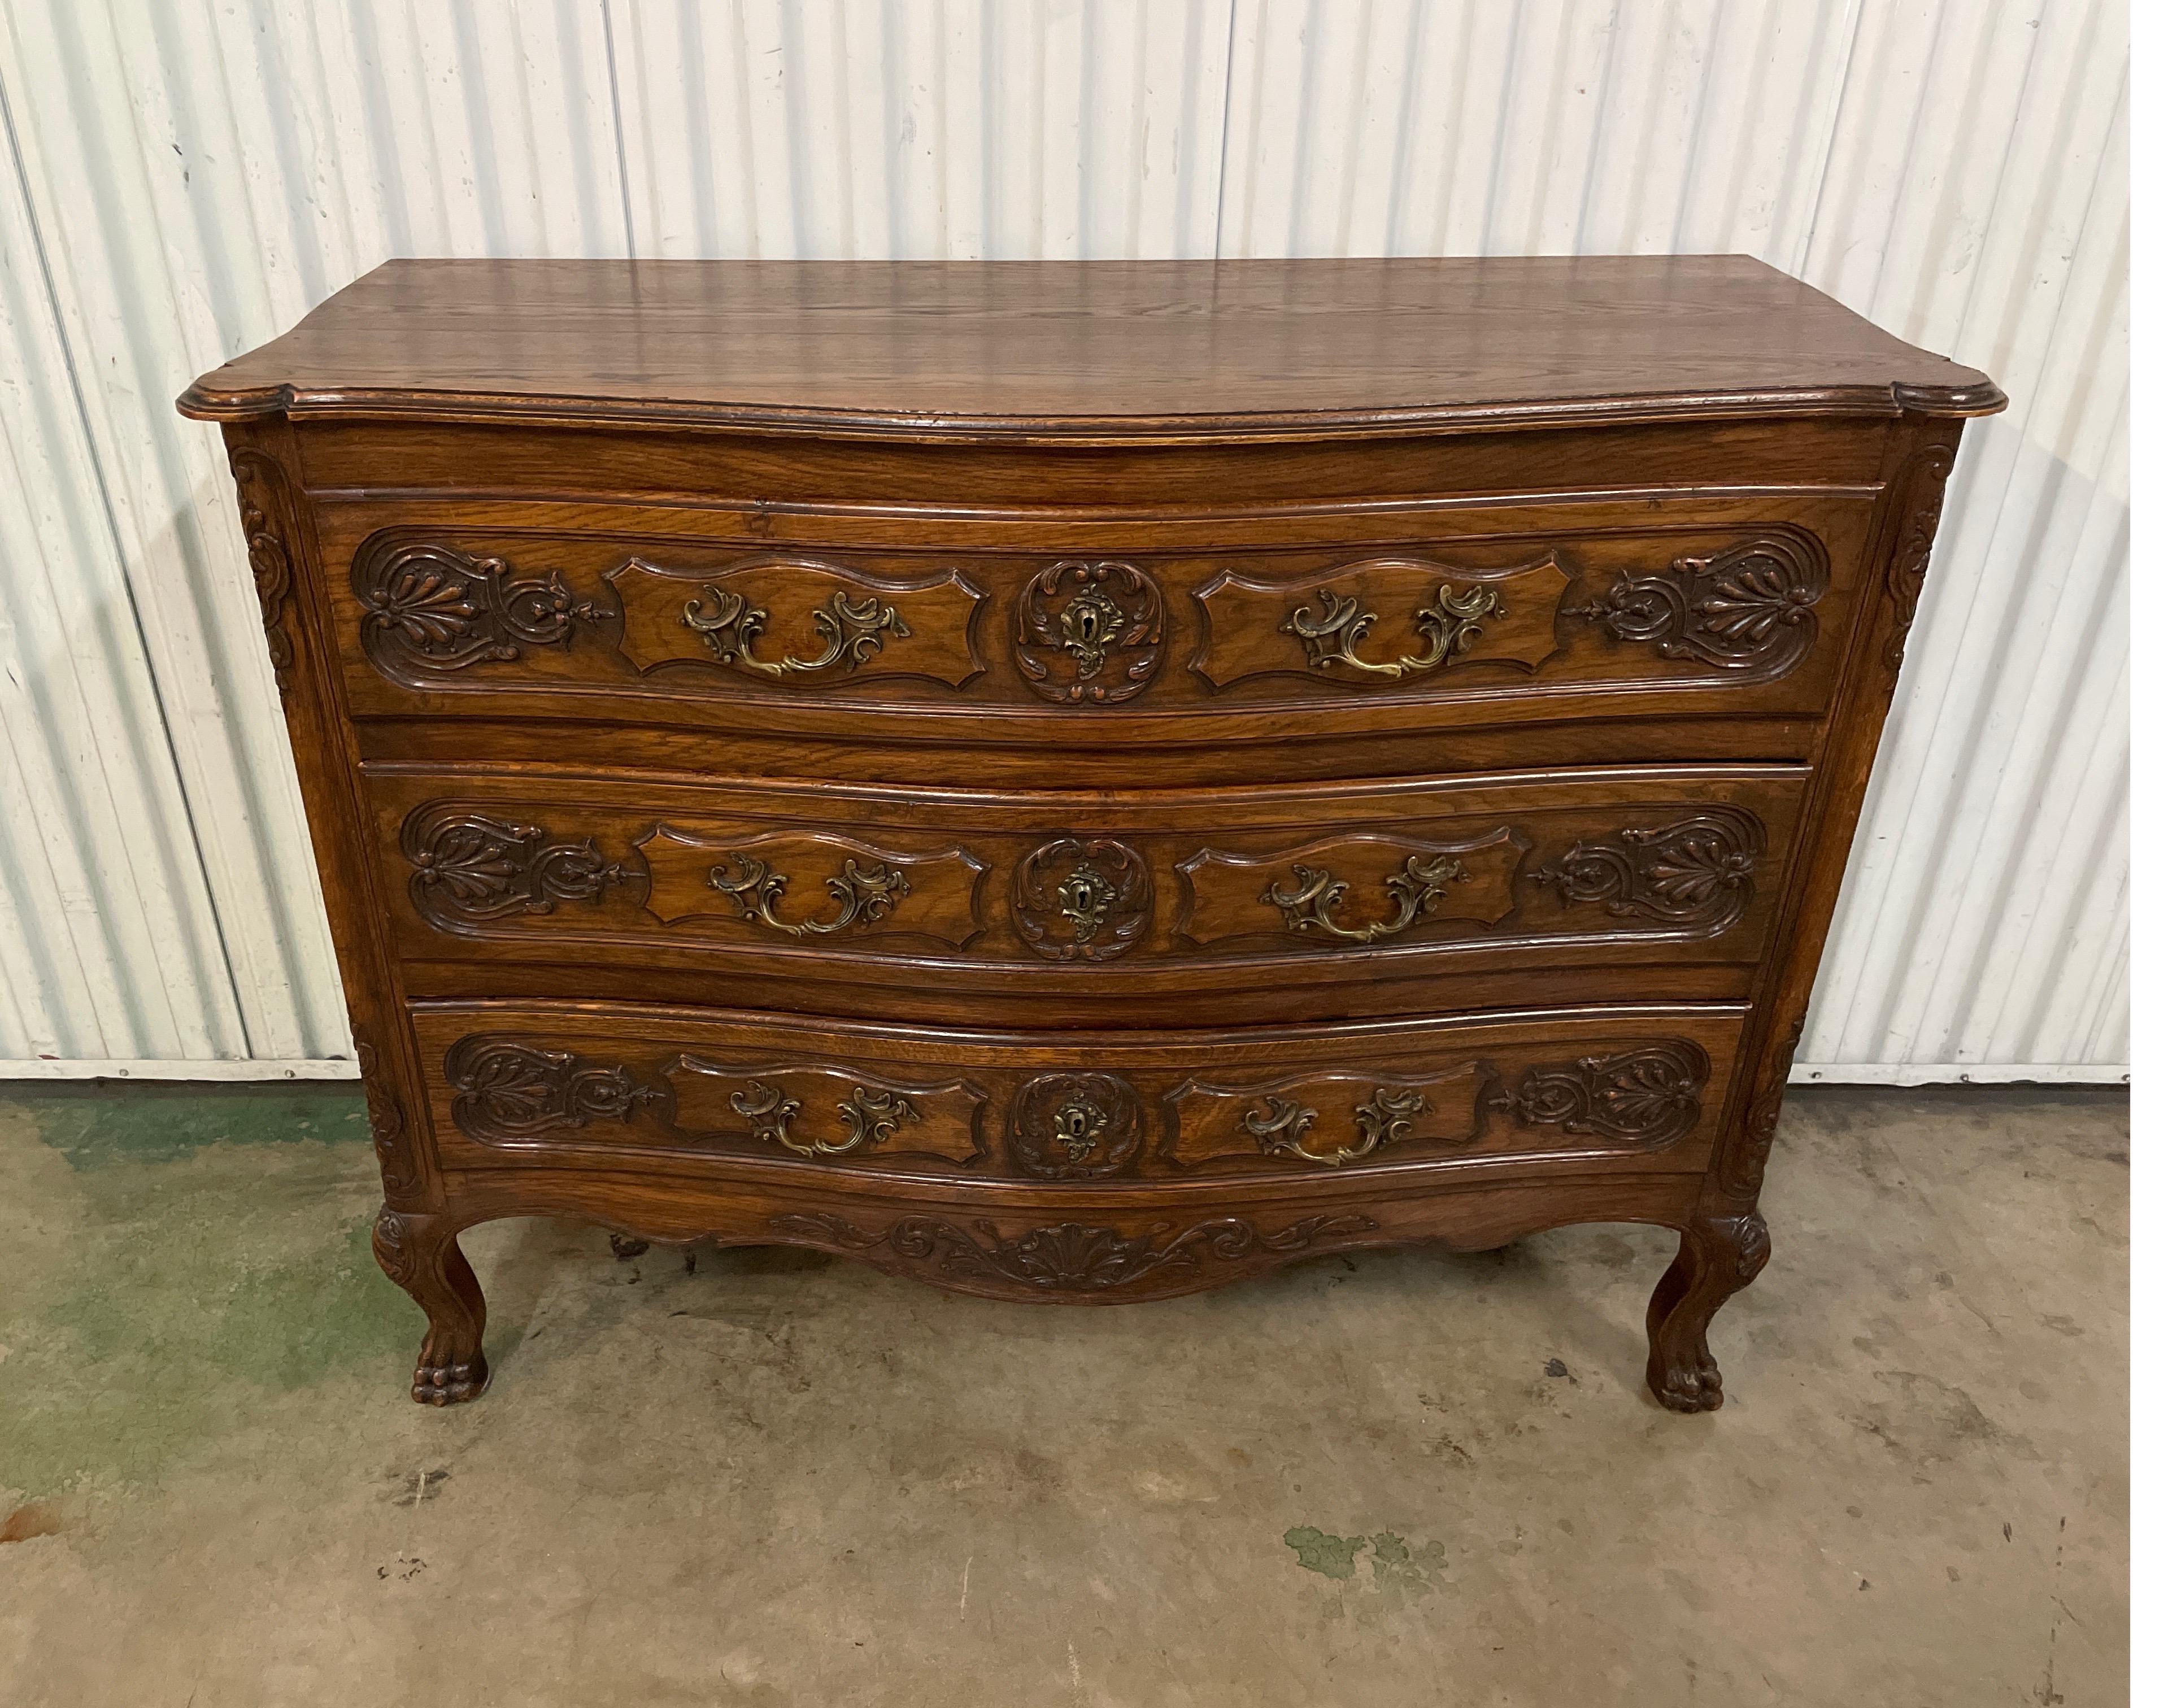 Country French hand carved three drawer dresser with paw feet.